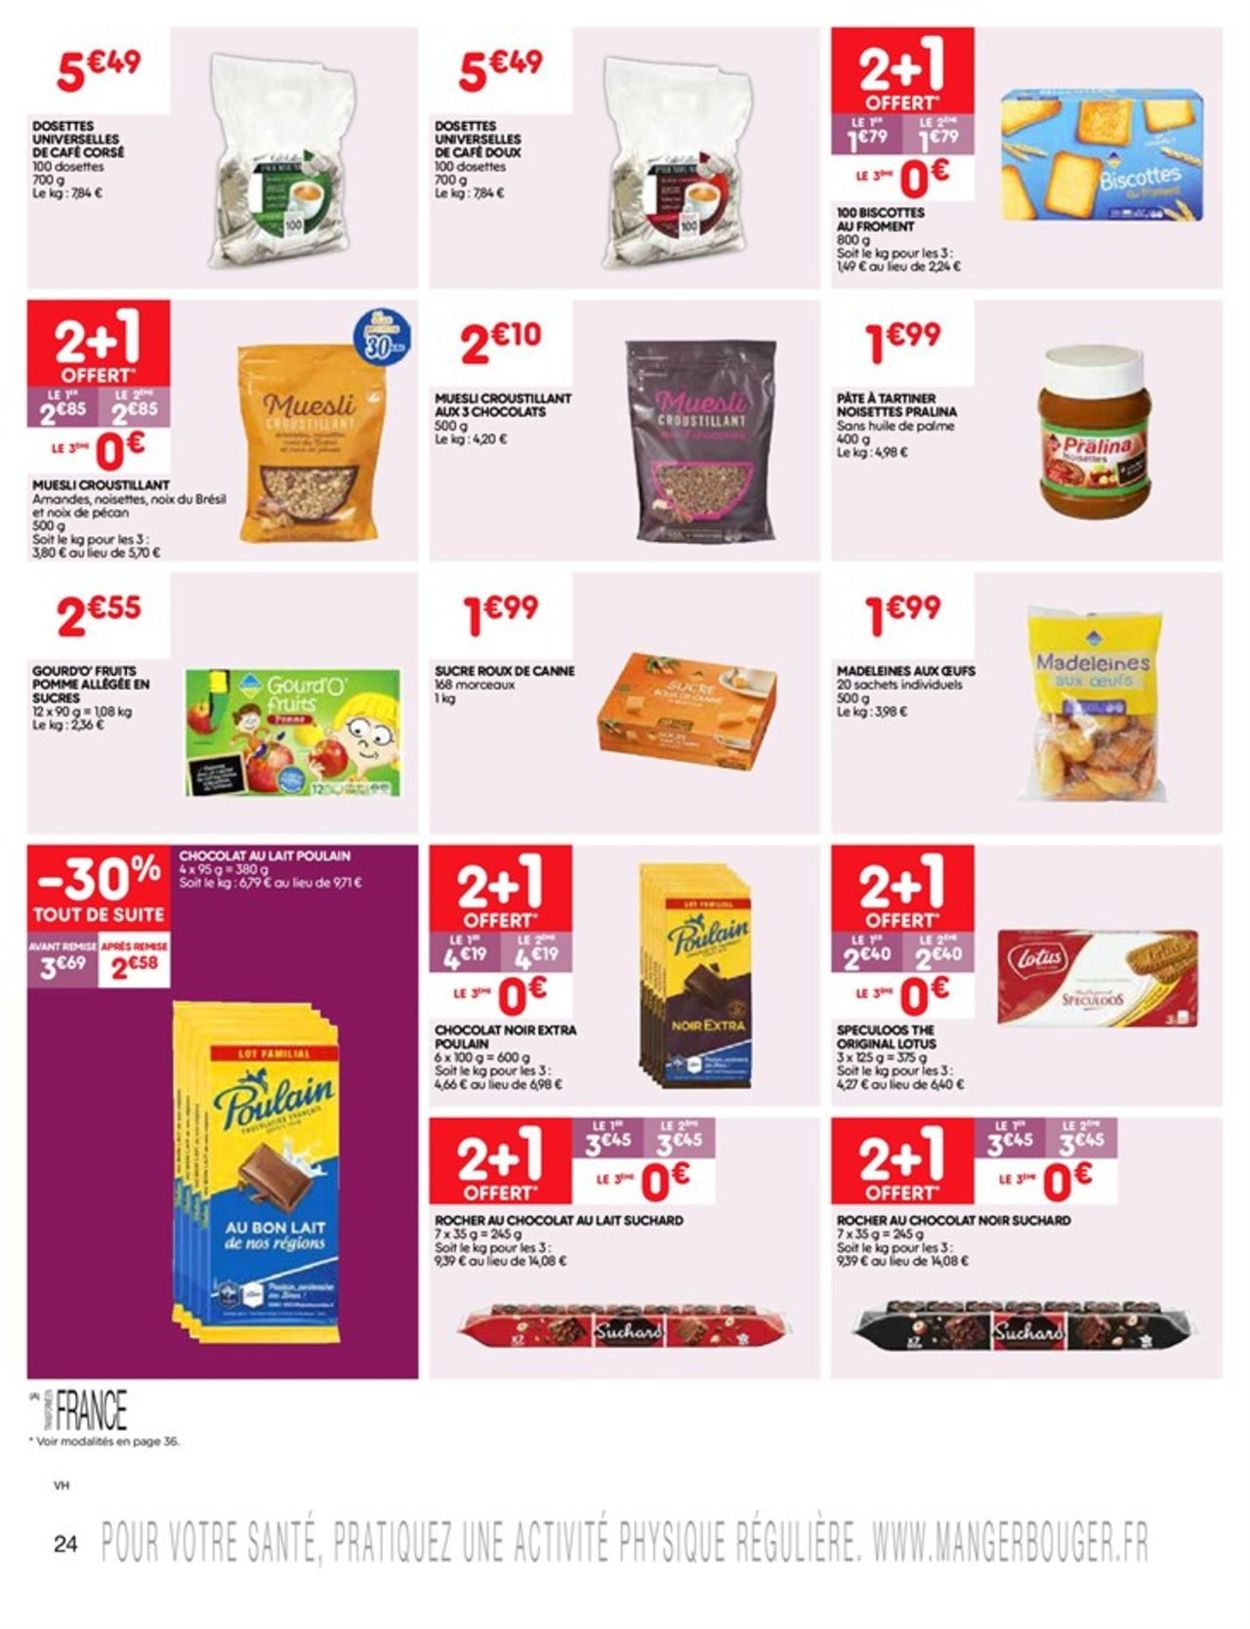 Leader Price Catalogue - 03.09-15.09.2019 (Page 24)